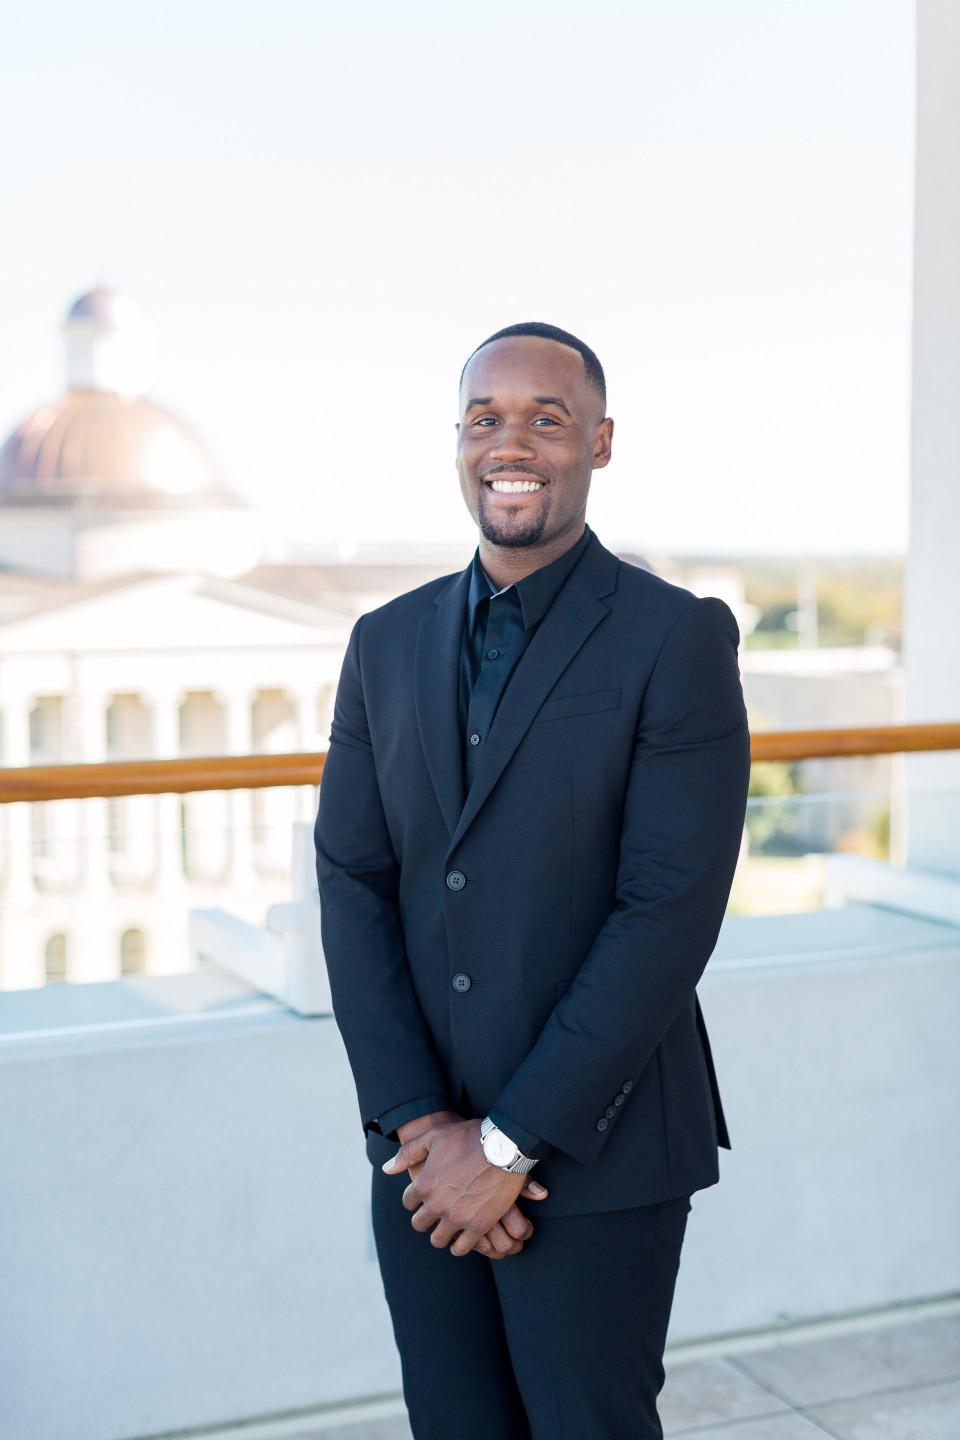 Jackson native Warn Wilson is an engineer, artist, author and entrepreneur. One of his projects is a trivia app called Na Bruh that includes a category of questions about Jackson.